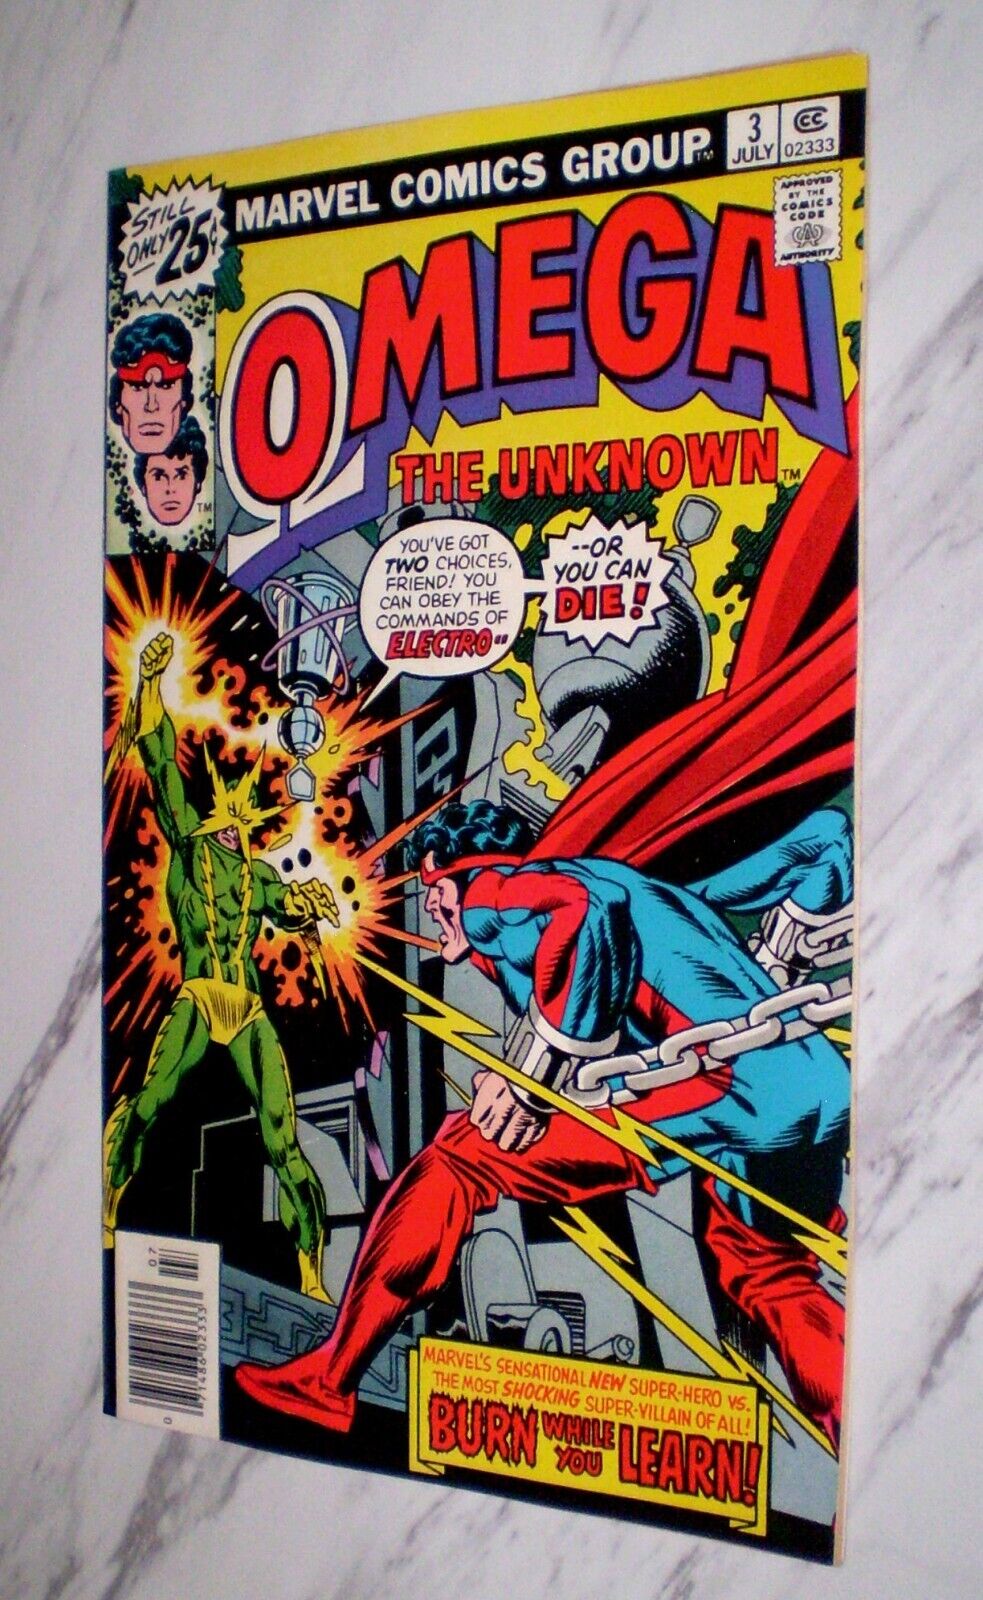 Omega the Unknown #3 NM+ 9.6 OW pages 1976 Marvel Electro apperance